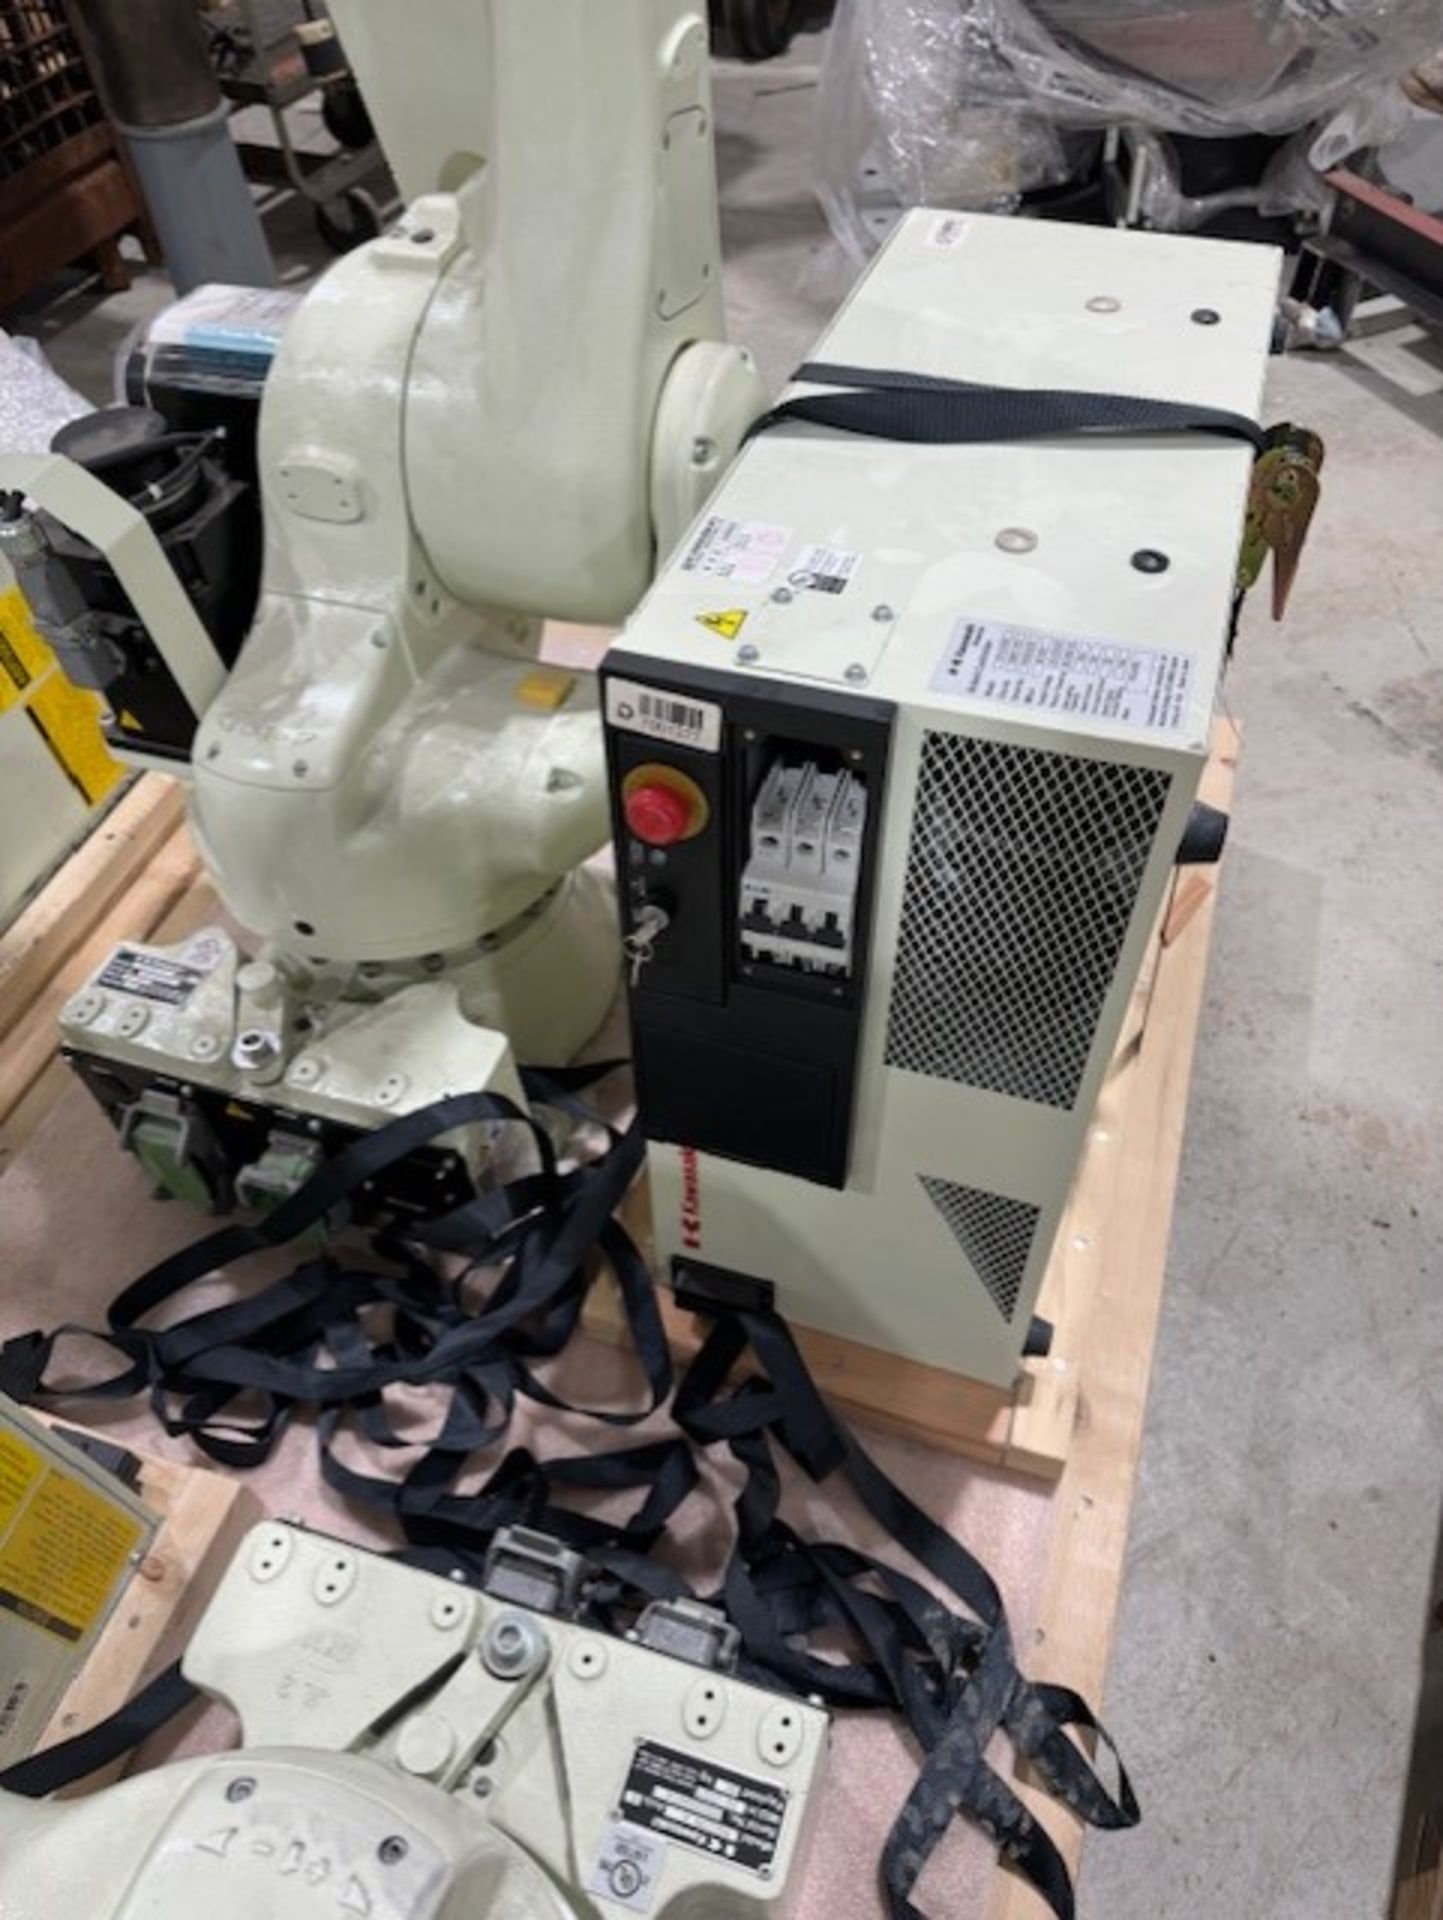 LIGHTLY USED KAWASAKI ROBOT RS020N, SN 4712, 20KG X 1725MM REACH WITH EO1 CONTROLS, CABLES & TEACH - Image 3 of 7